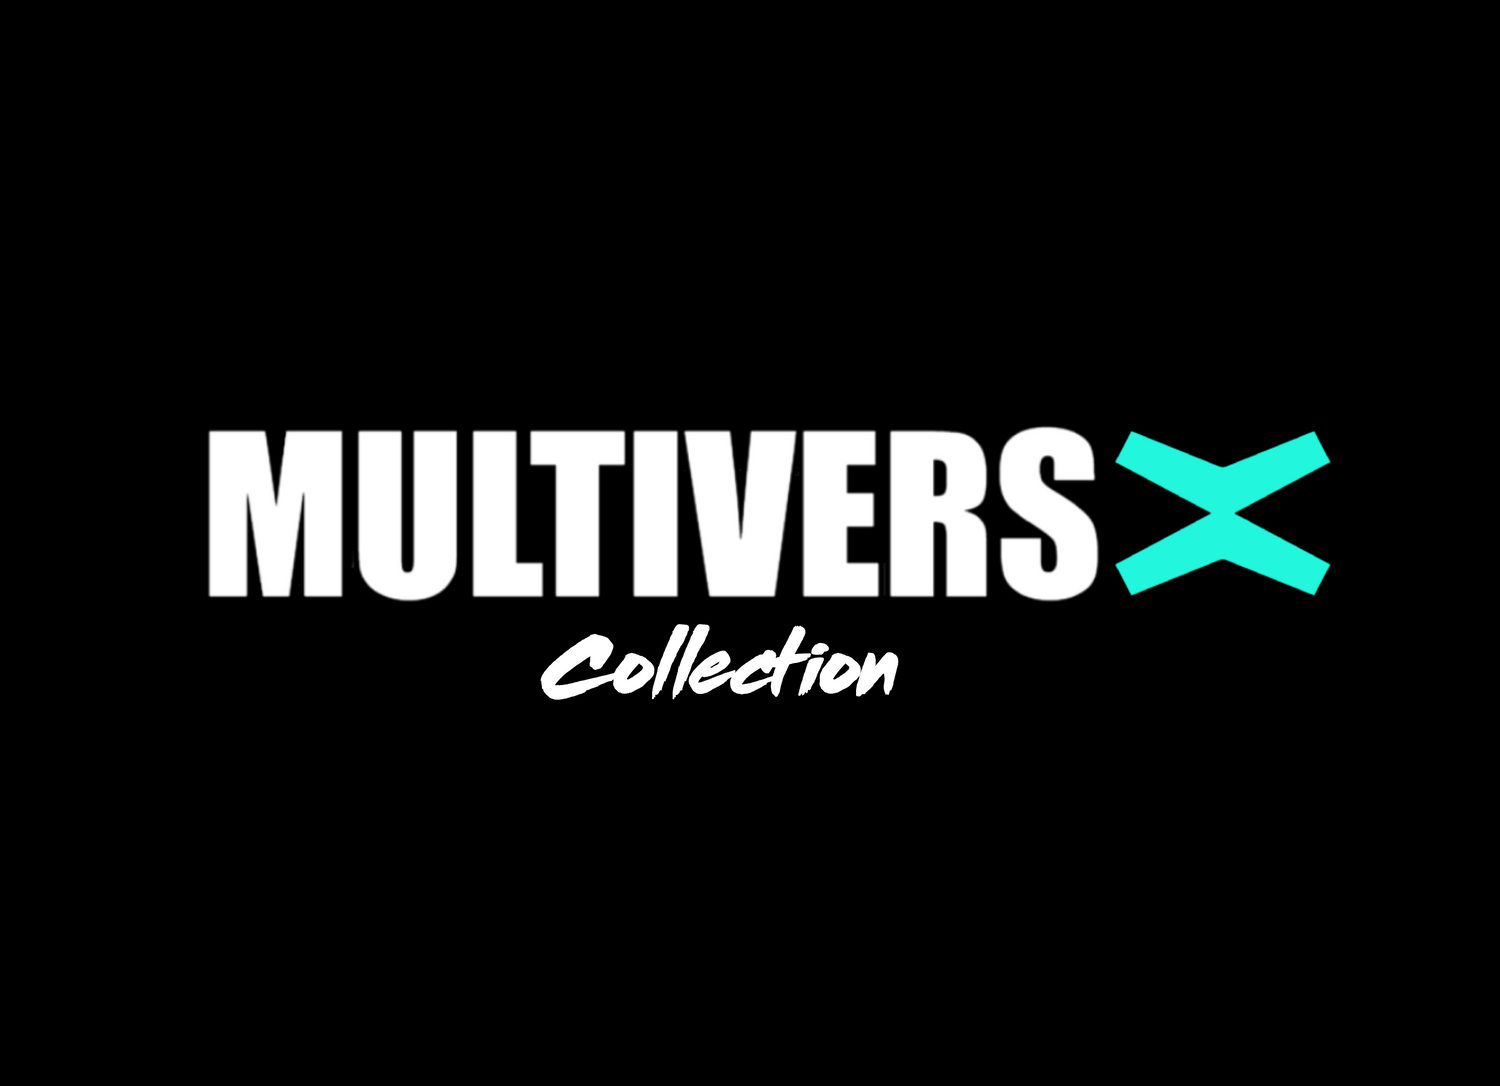 MultiversX Collection